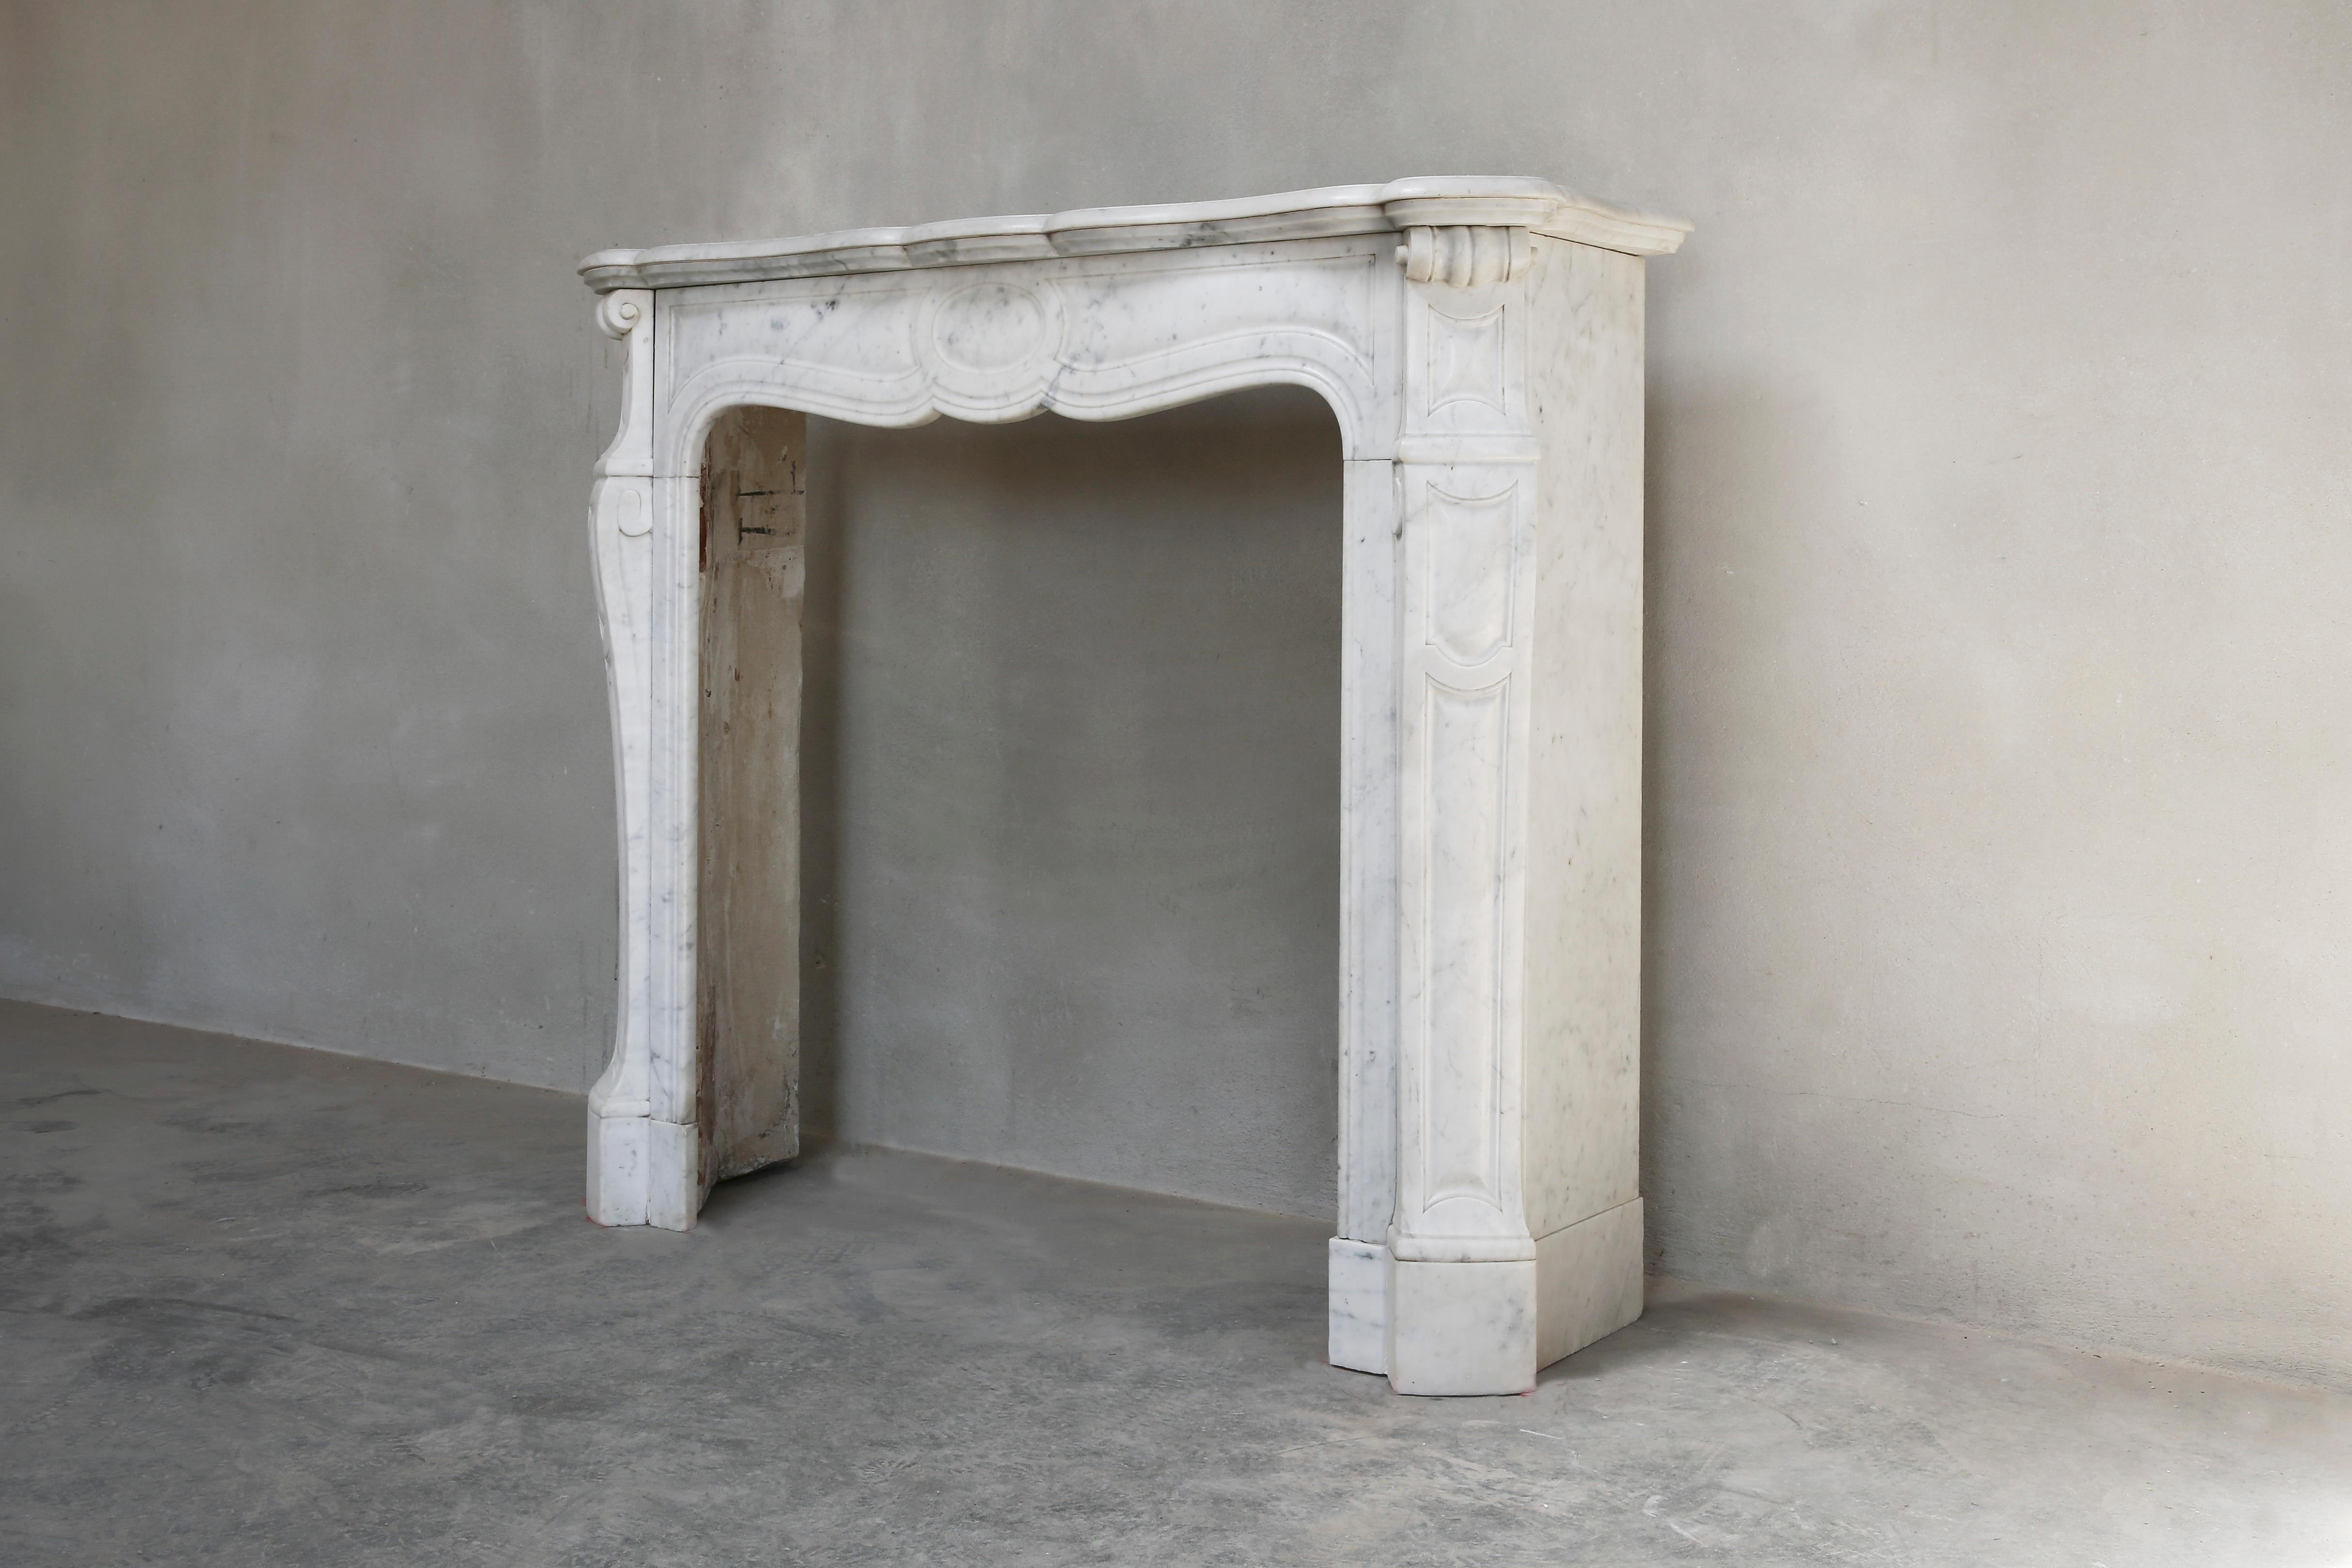 Beautiful Pompadour fireplace from the 20th Century. Pompadour fireplaces are generally slightly smaller in size and are very elegant due to the round shape and ornament in the middle. The marble type of this fireplace is Carrara marble. This type